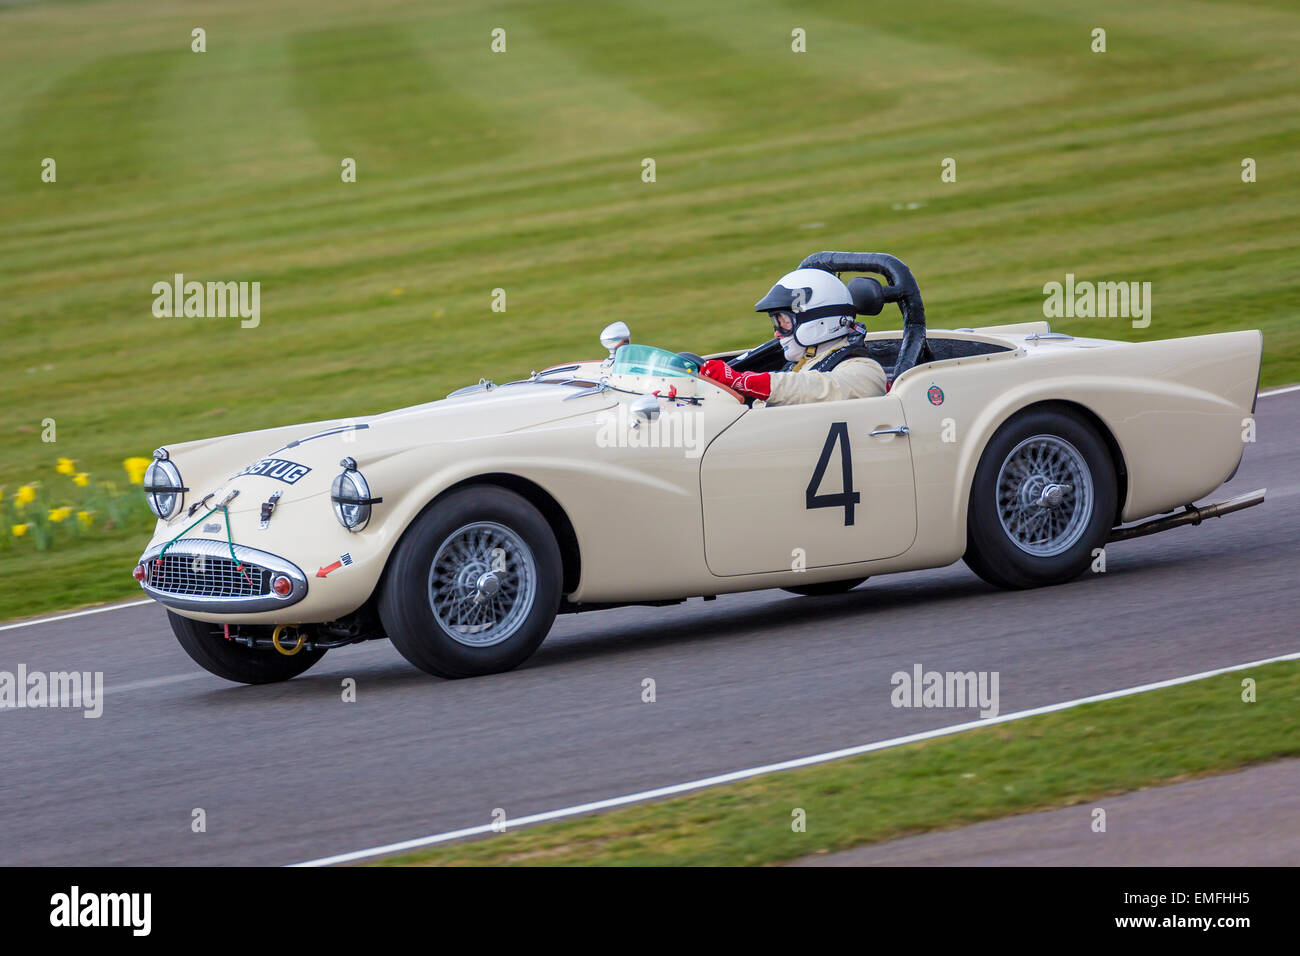 1959 Daimler SP250 with driver Andy Shepherd, Les Leston Cup, 2015 73rd Goodwood Members meeting, Sussex, UK. Stock Photo